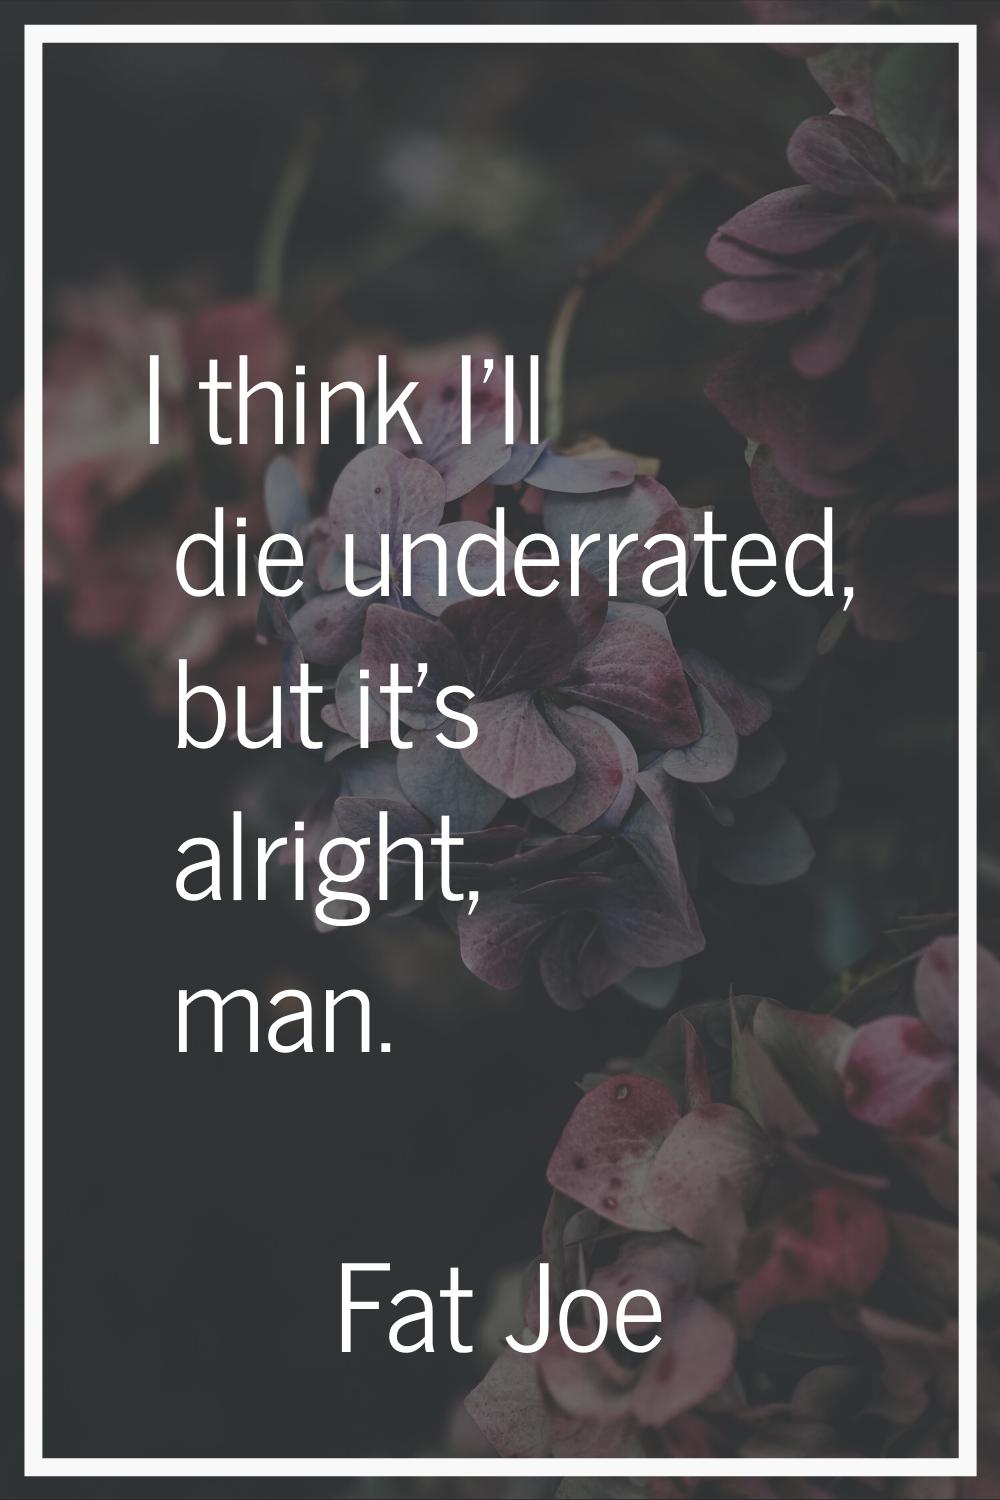 I think I'll die underrated, but it's alright, man.